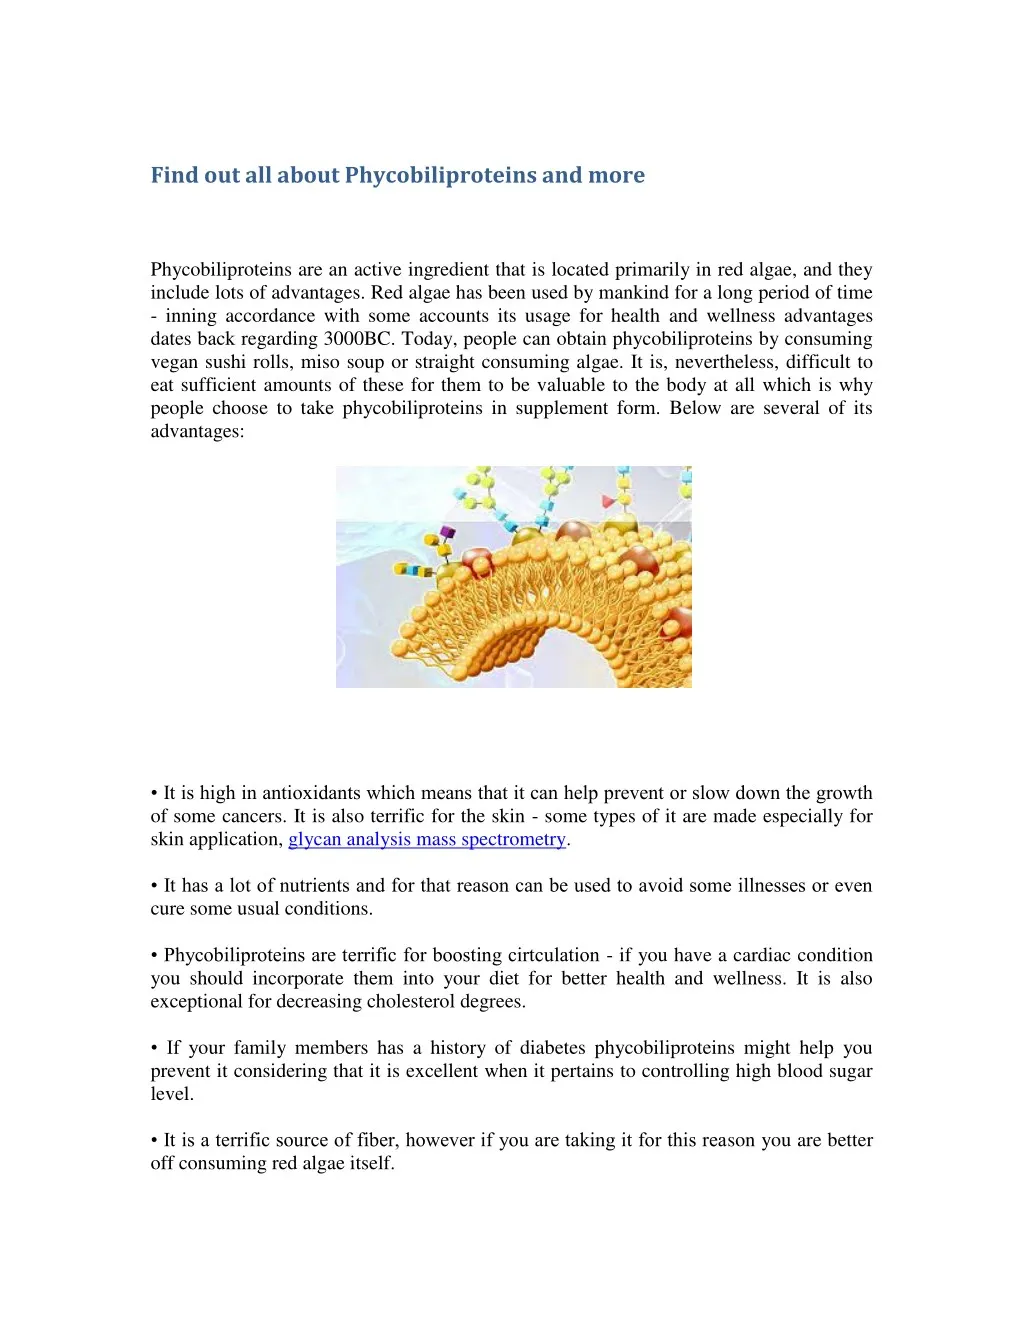 find out all about phycobiliproteins and more